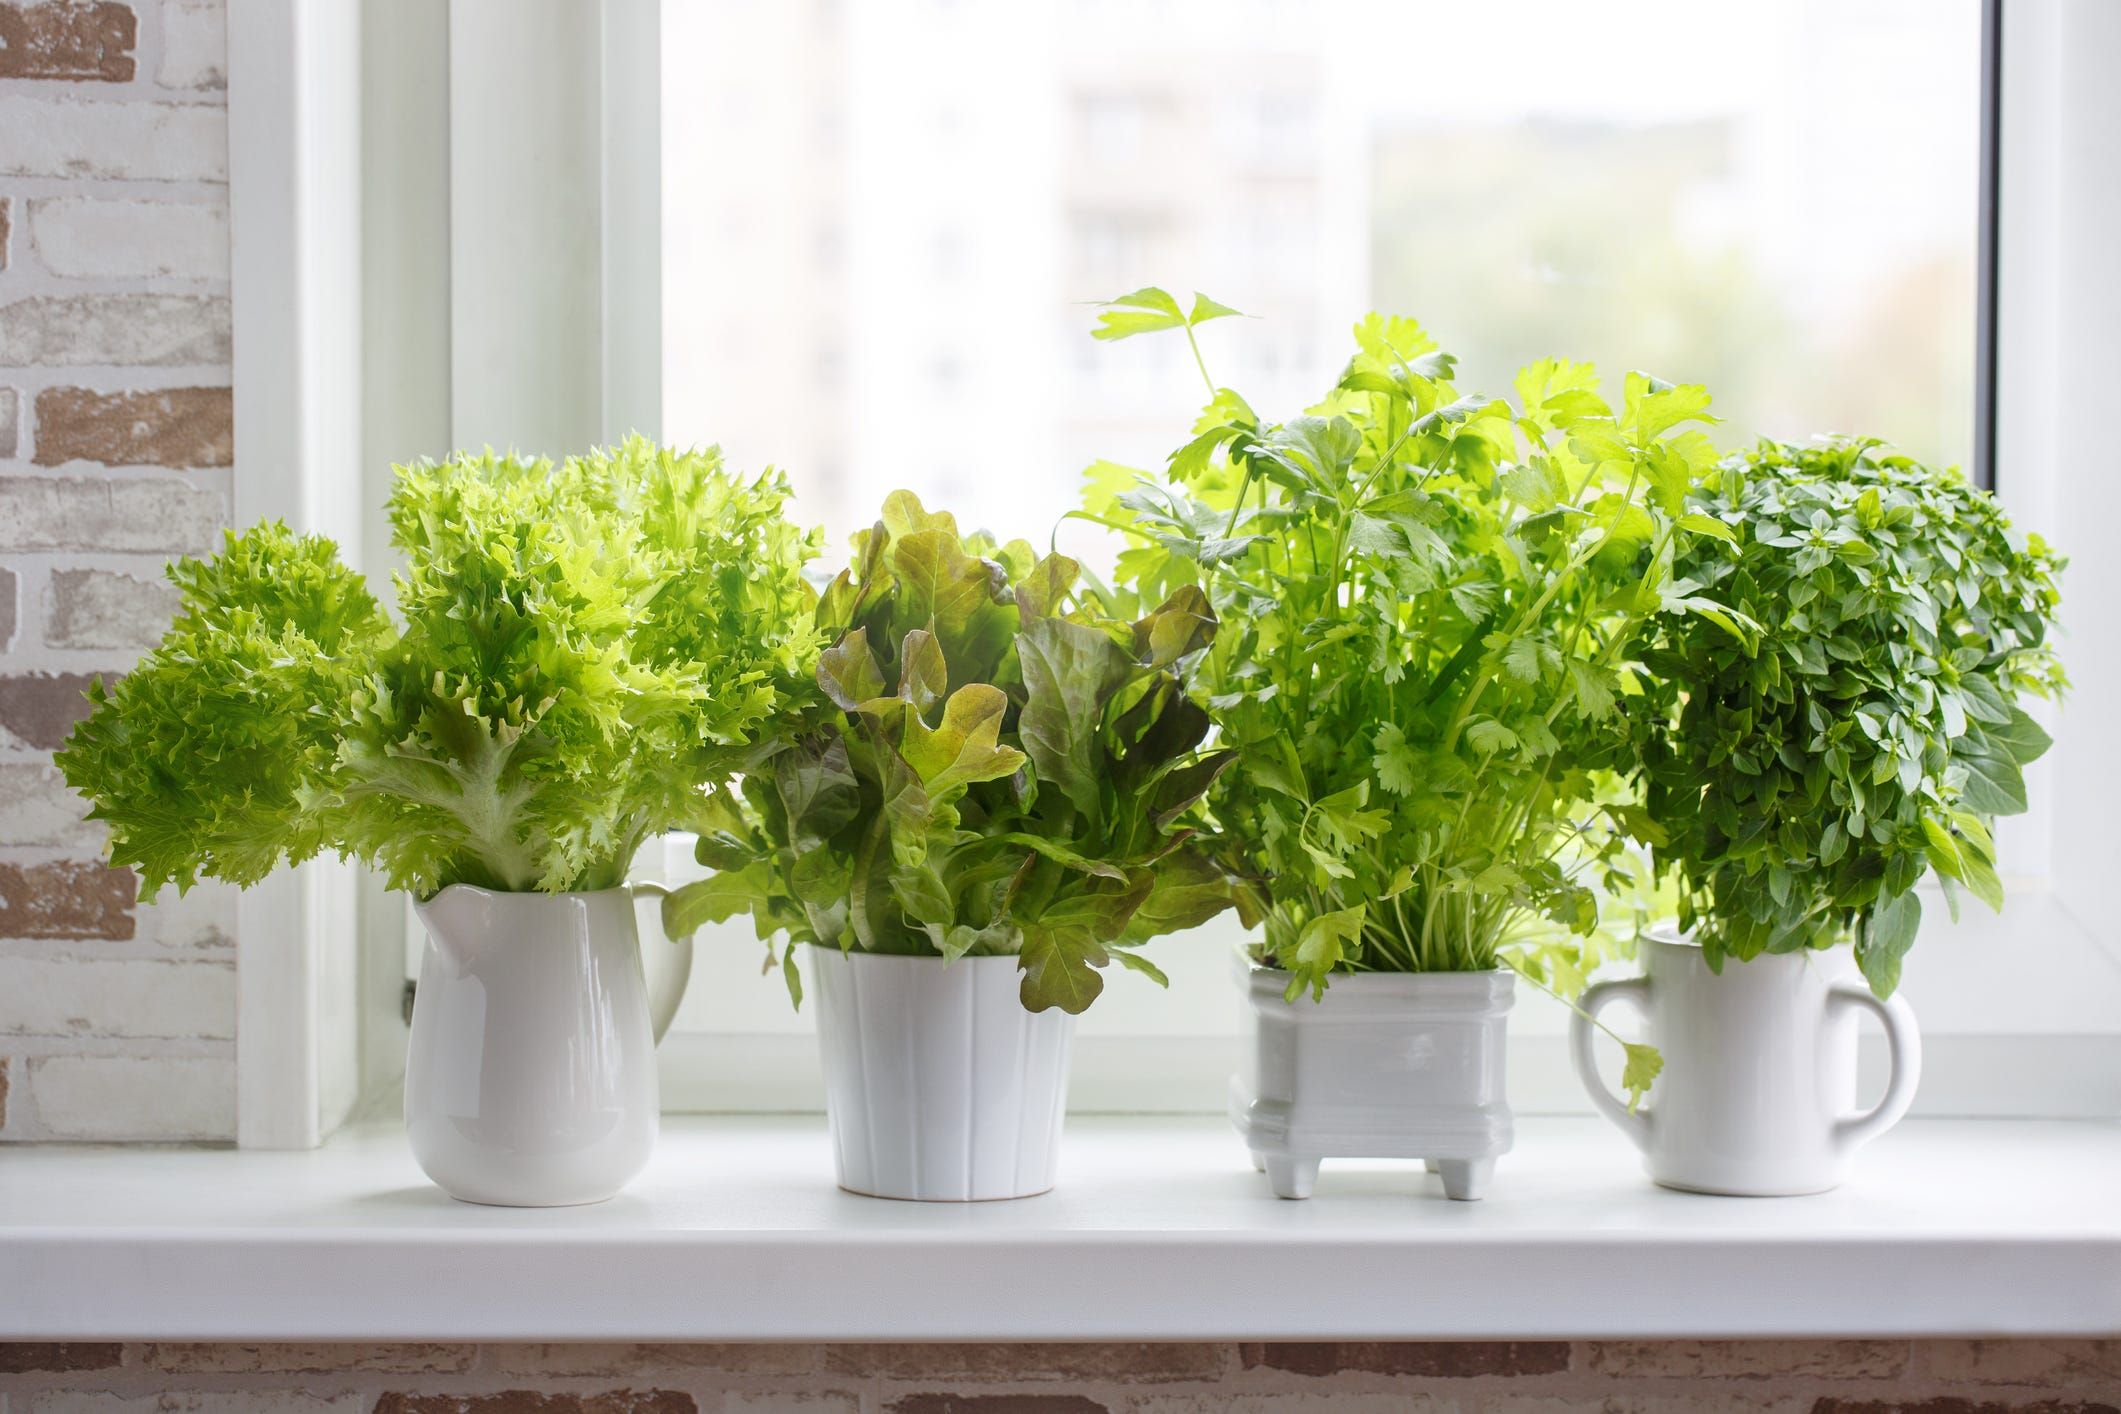 17 Indoor Herb Gardens That Will Add New Life to Your Kitchen